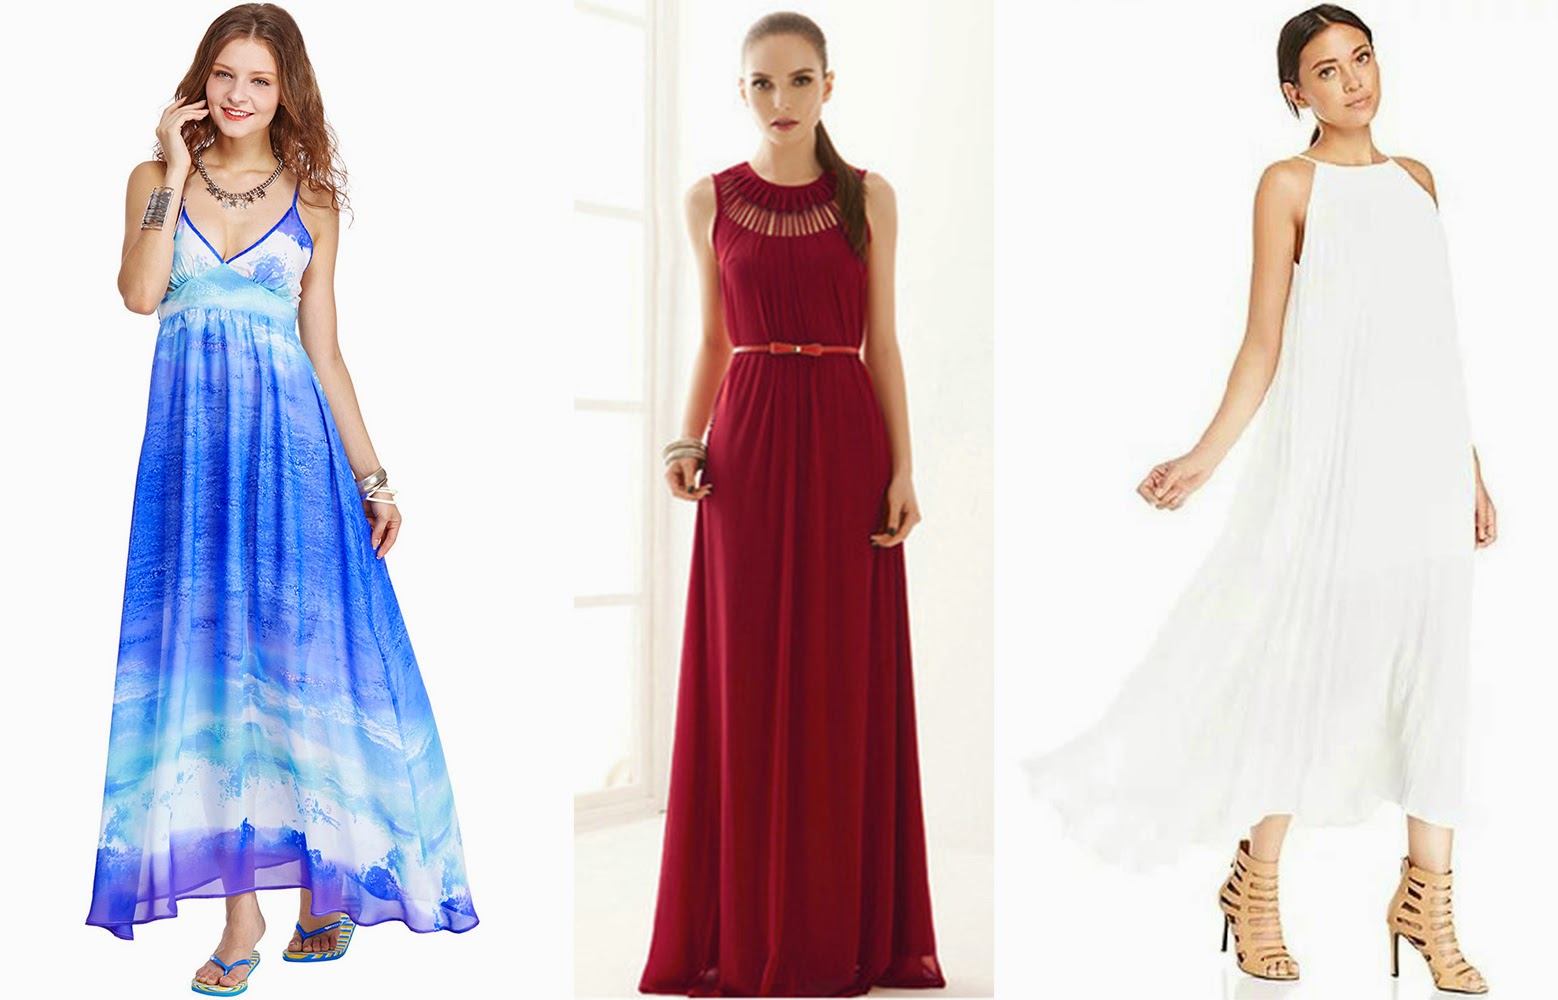 (L-R) Seawater Print Blue Camisole Dress, Sleeveless With Belt Hollow Maxi Dress, Off-shoulder Pleated Maxi White Dress